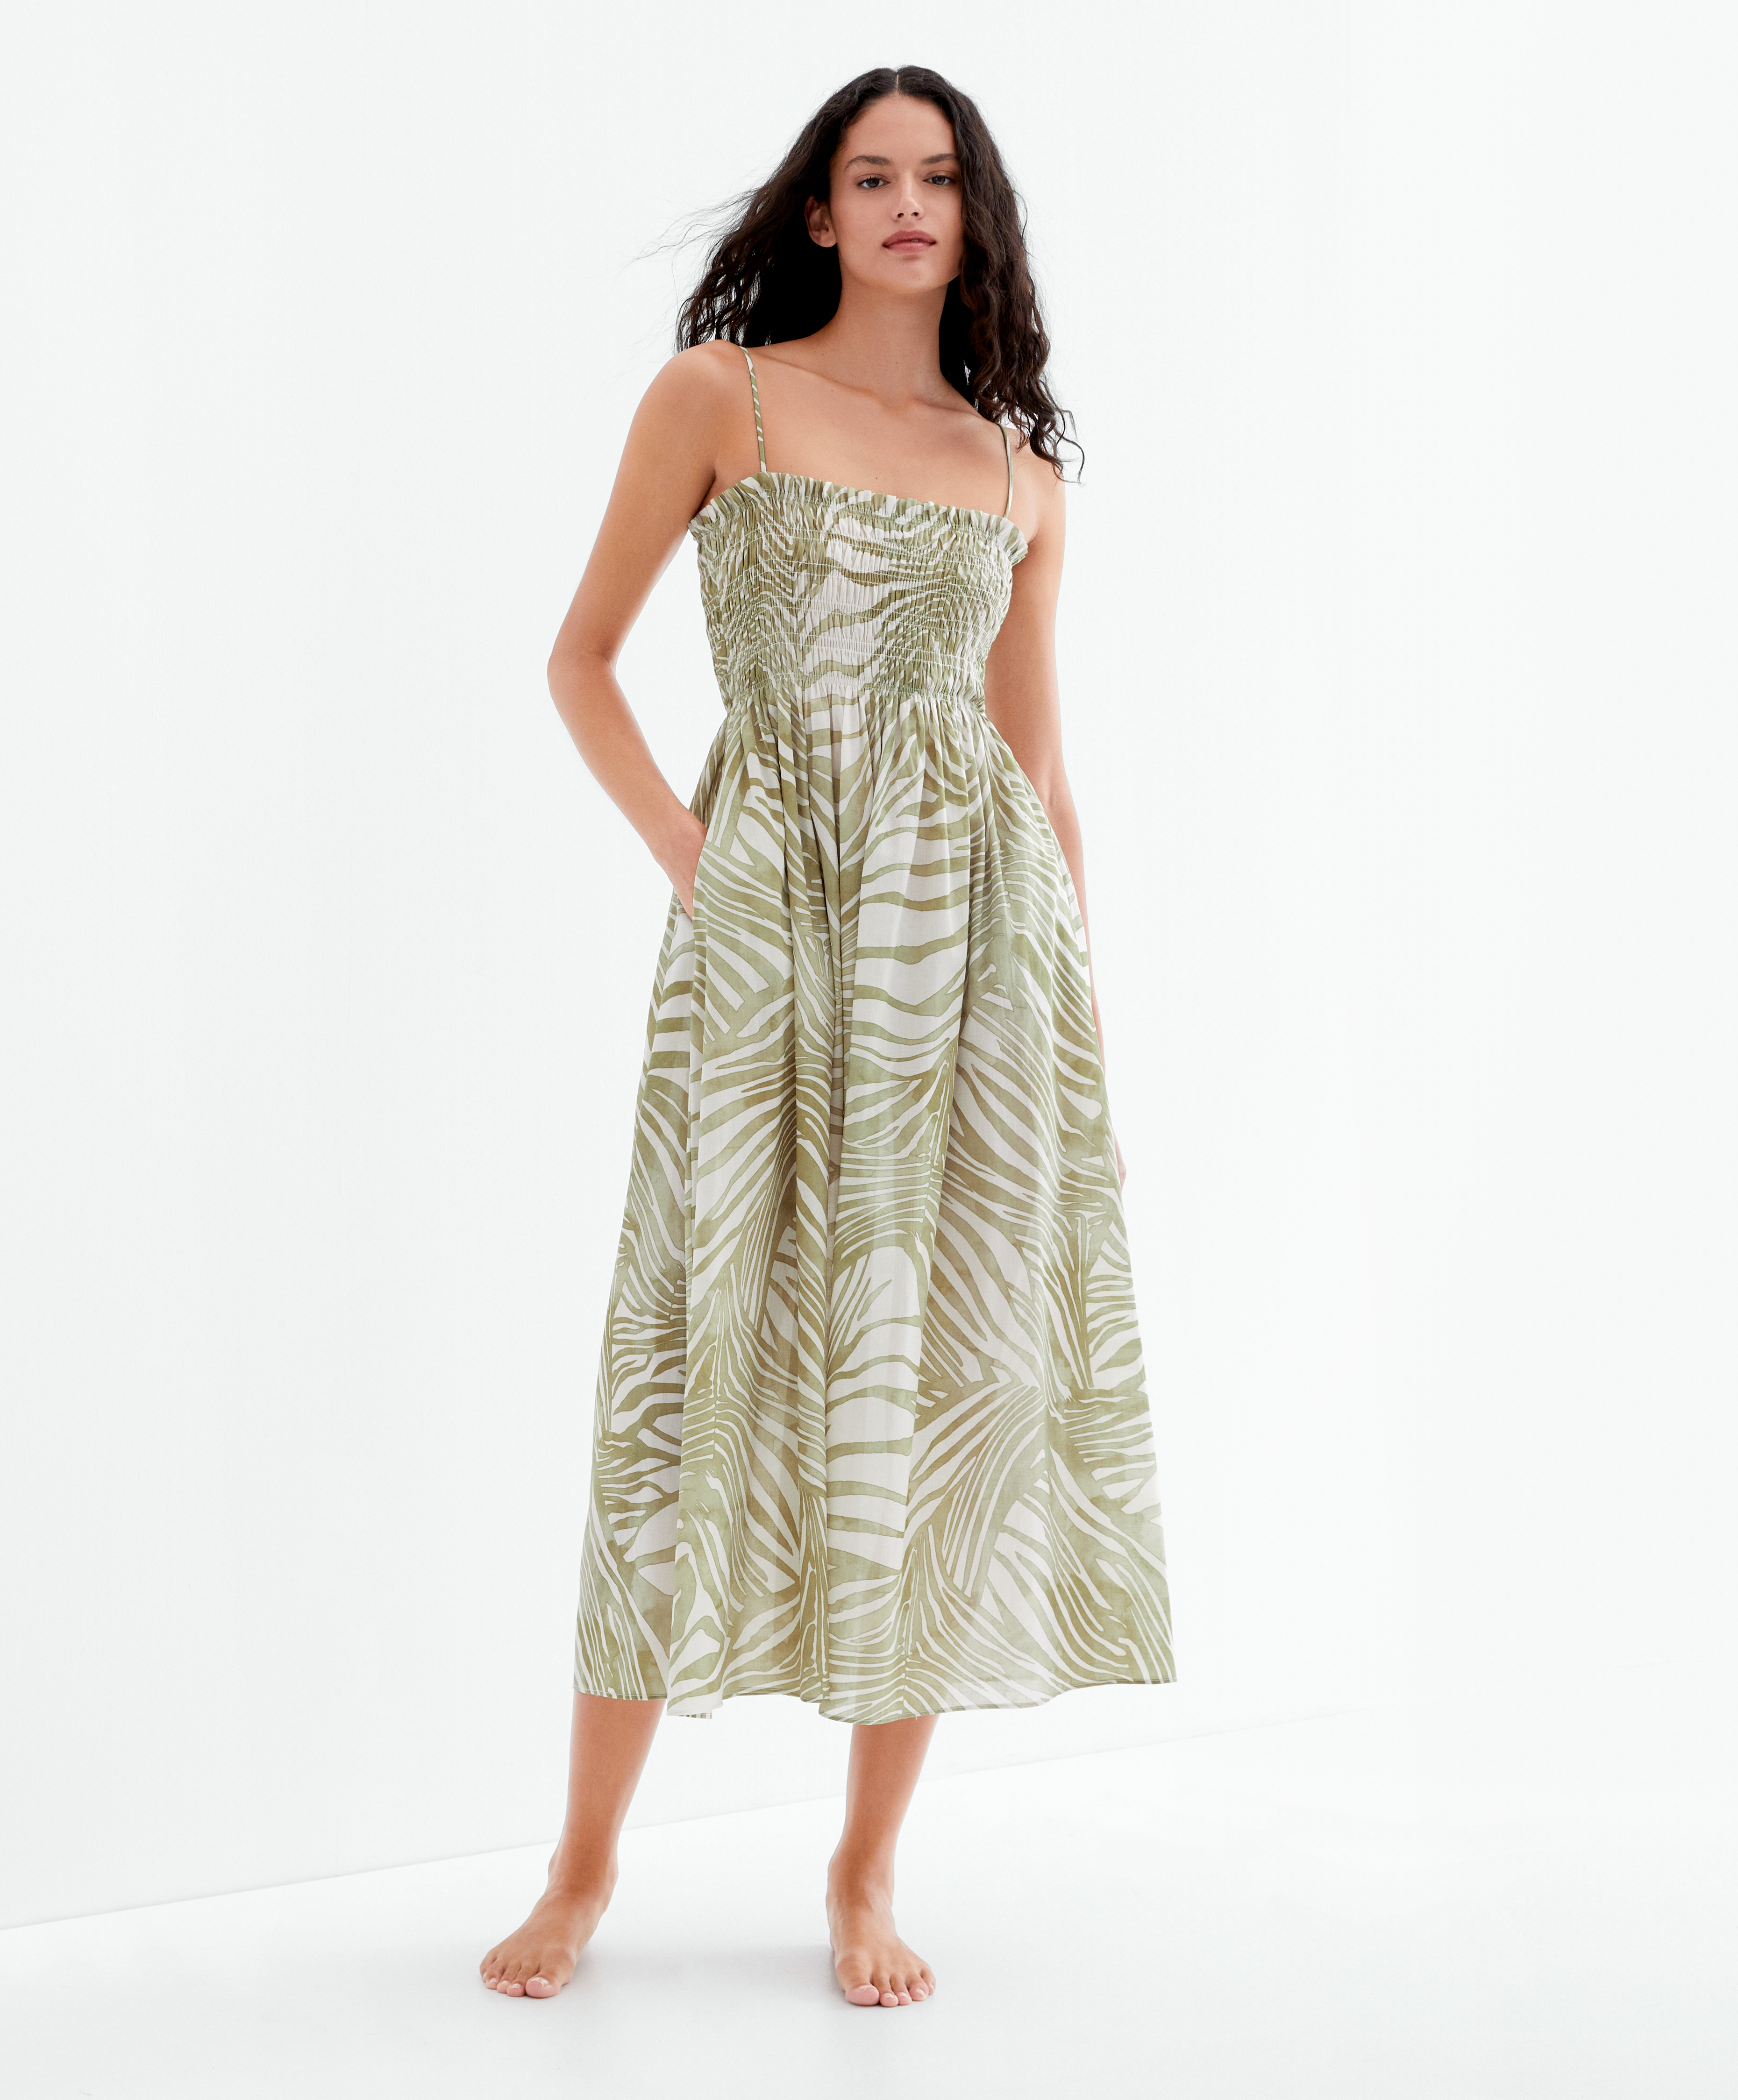 and beach dresses | United States